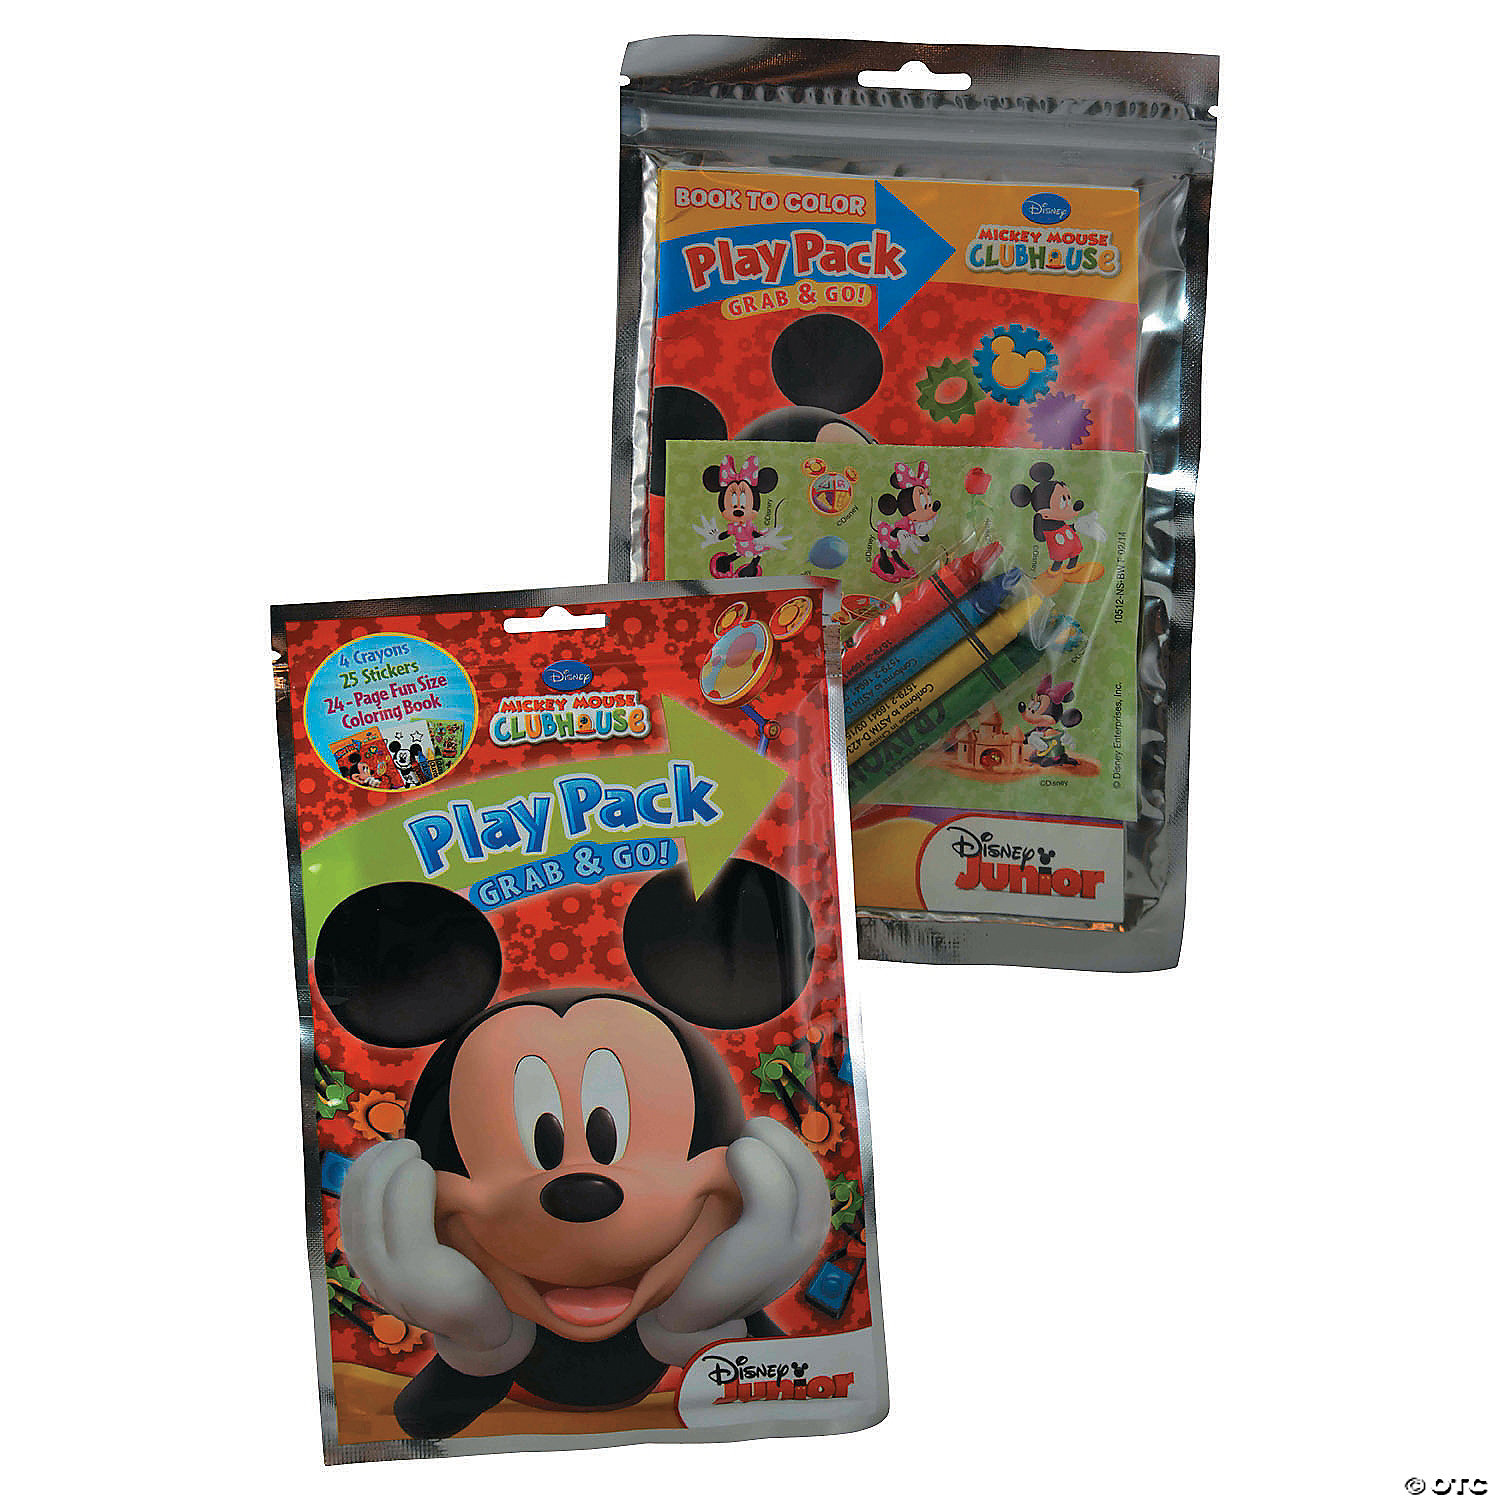  Learning Made Fun Mickey Mouse Club Edition : Toys & Games